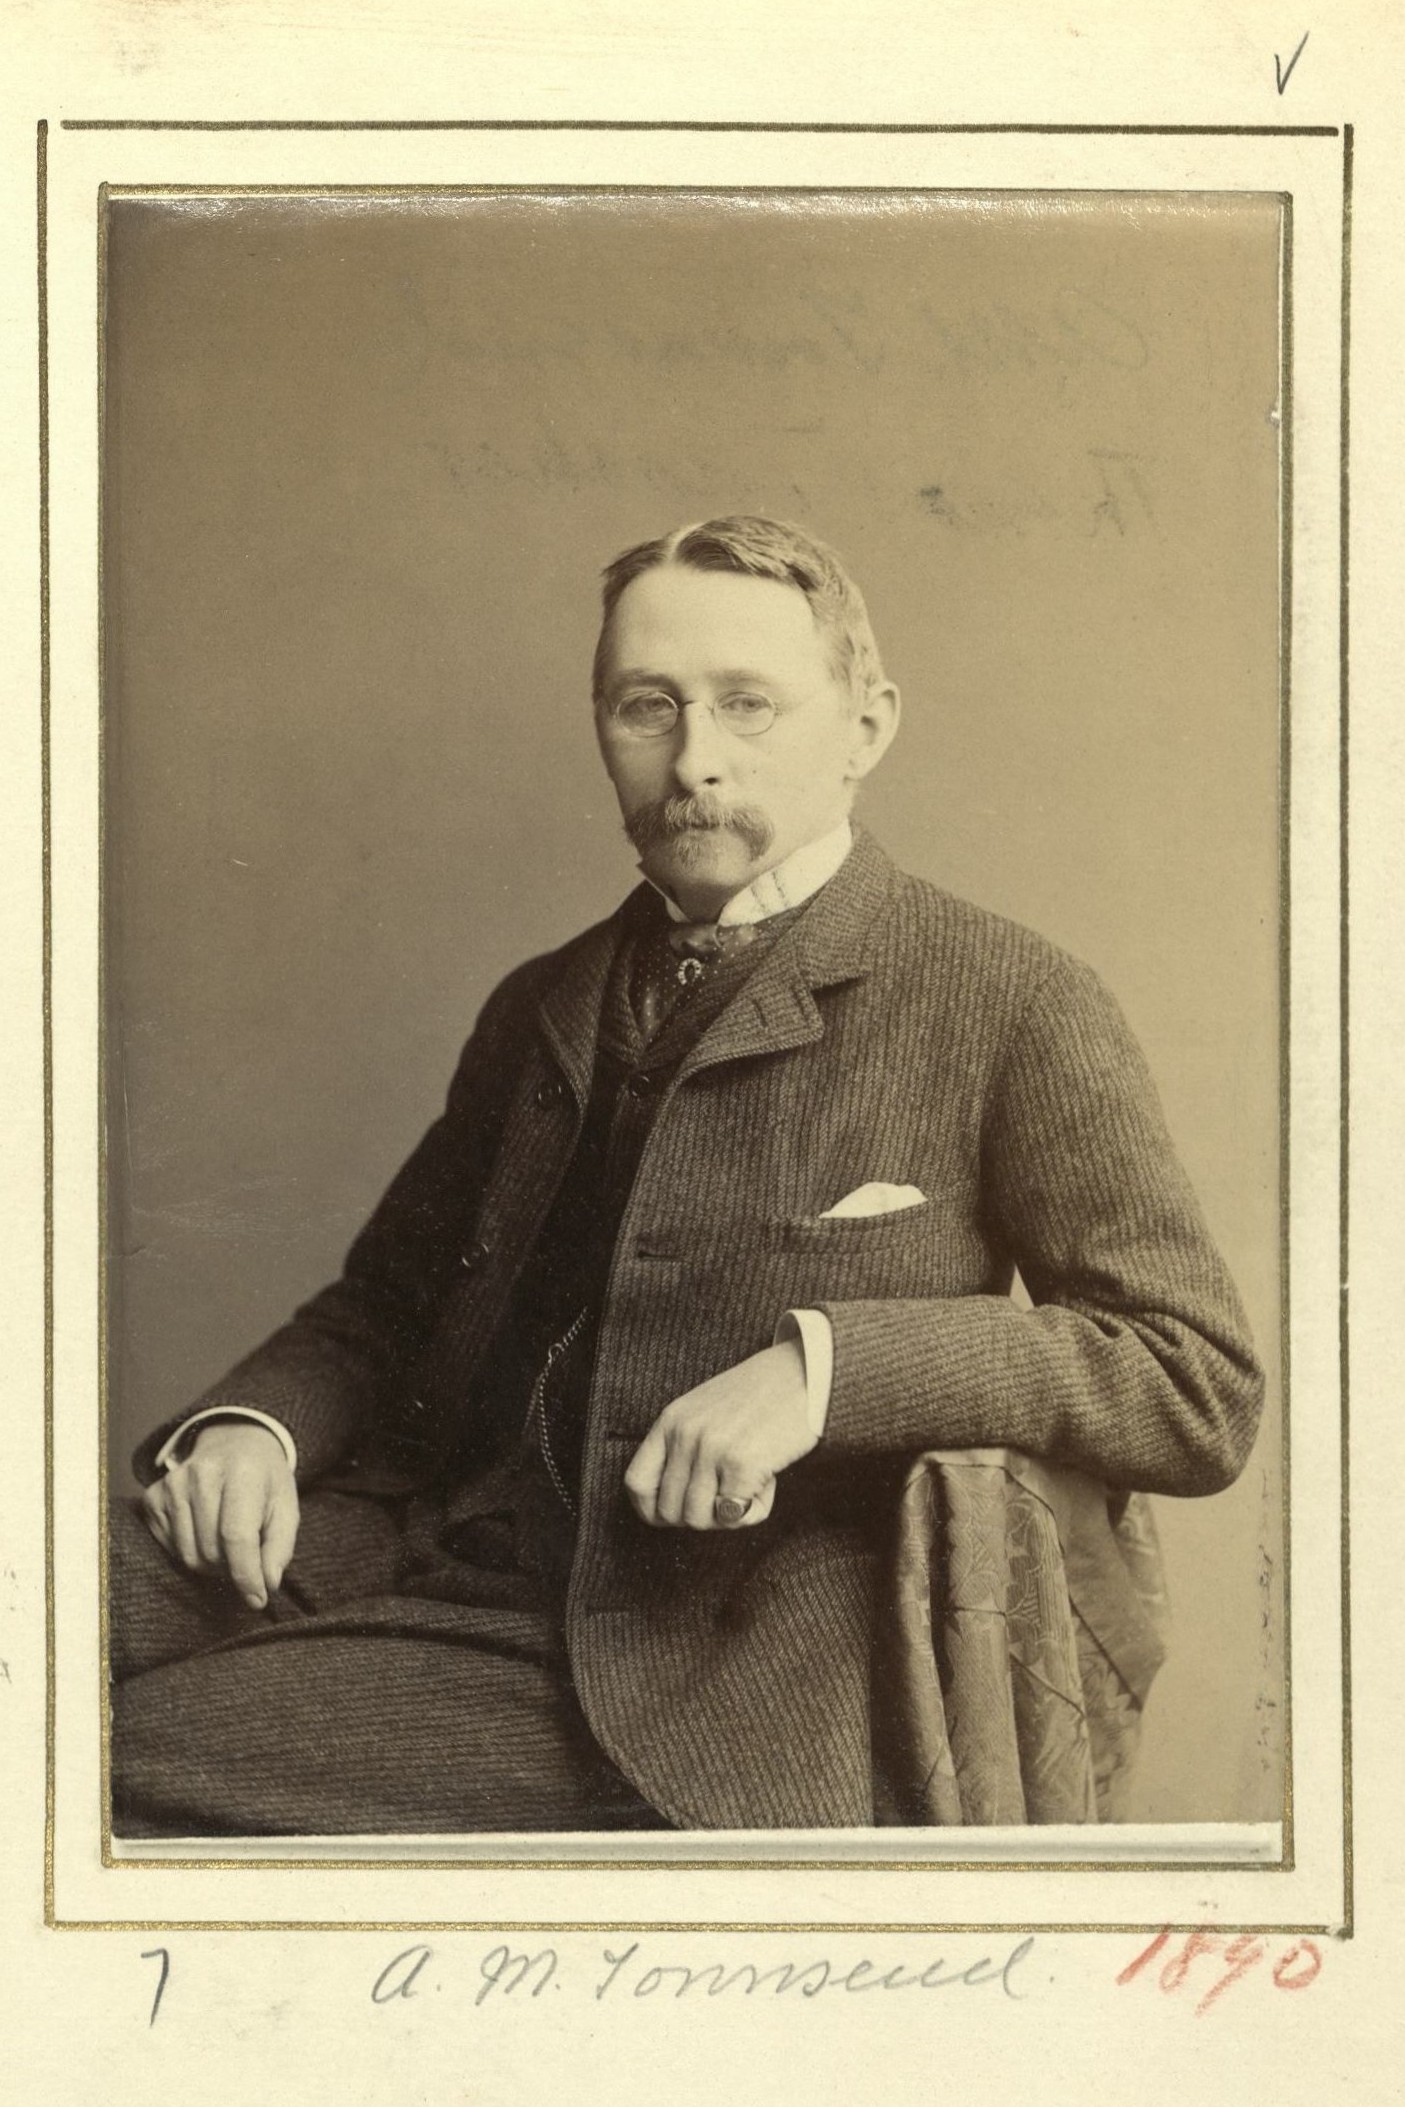 Member portrait of Alfred M. Townsend